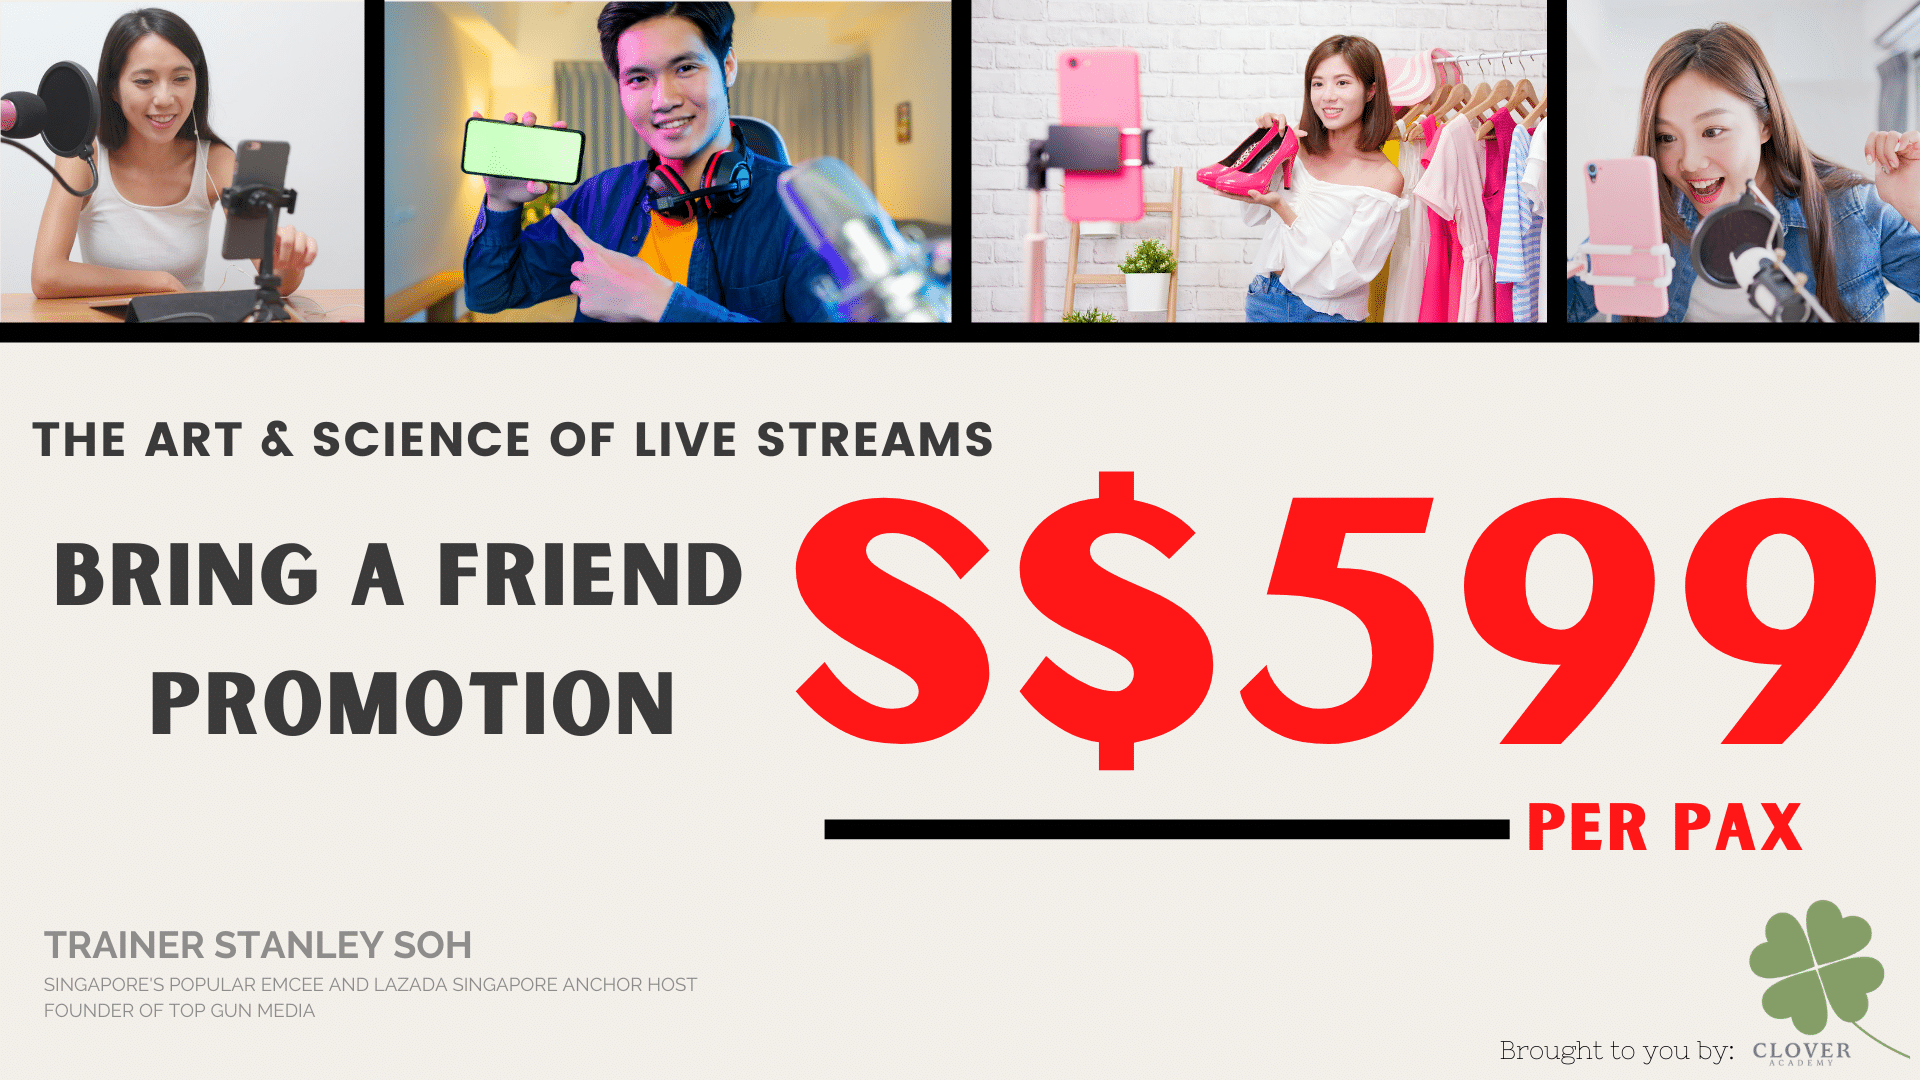 Bring a Friend Promotion: The Art & Science of Live Streams